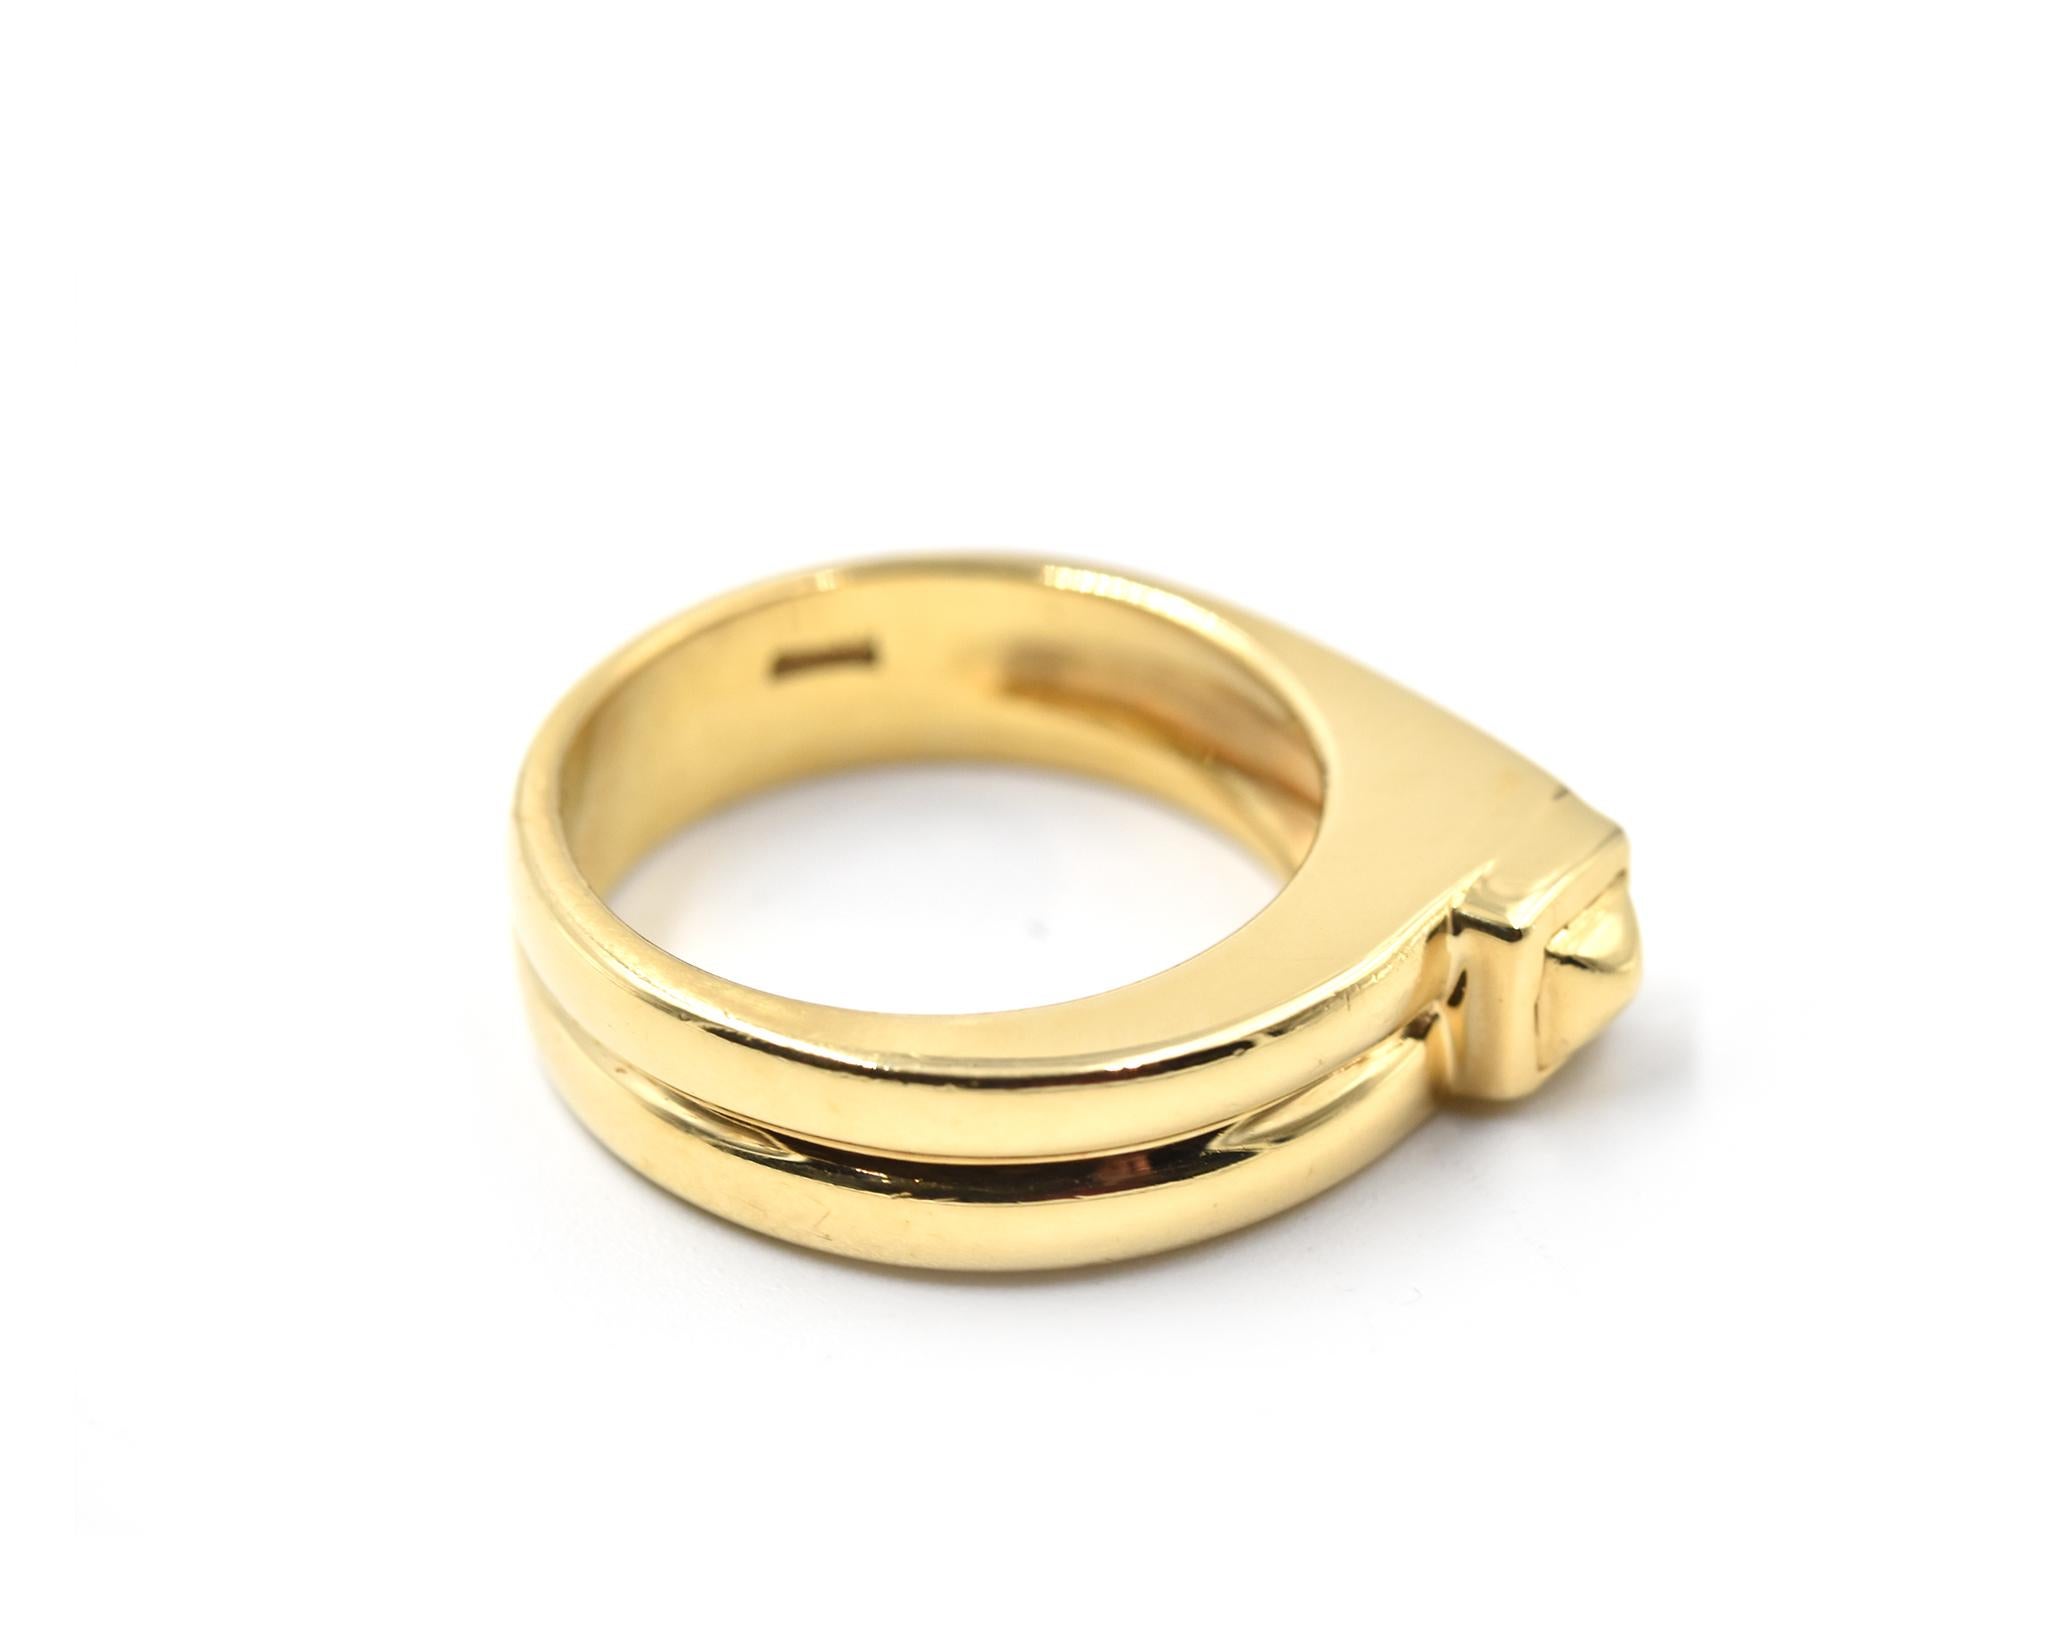 Designer: custom design
Material: 18k Yellow Gold
Ring Size: 6 ¾  (please allow two additional shipping days for sizing requests)
Dimensions: ring top is 5.87mm wide 
Weight: 10.54 grams
